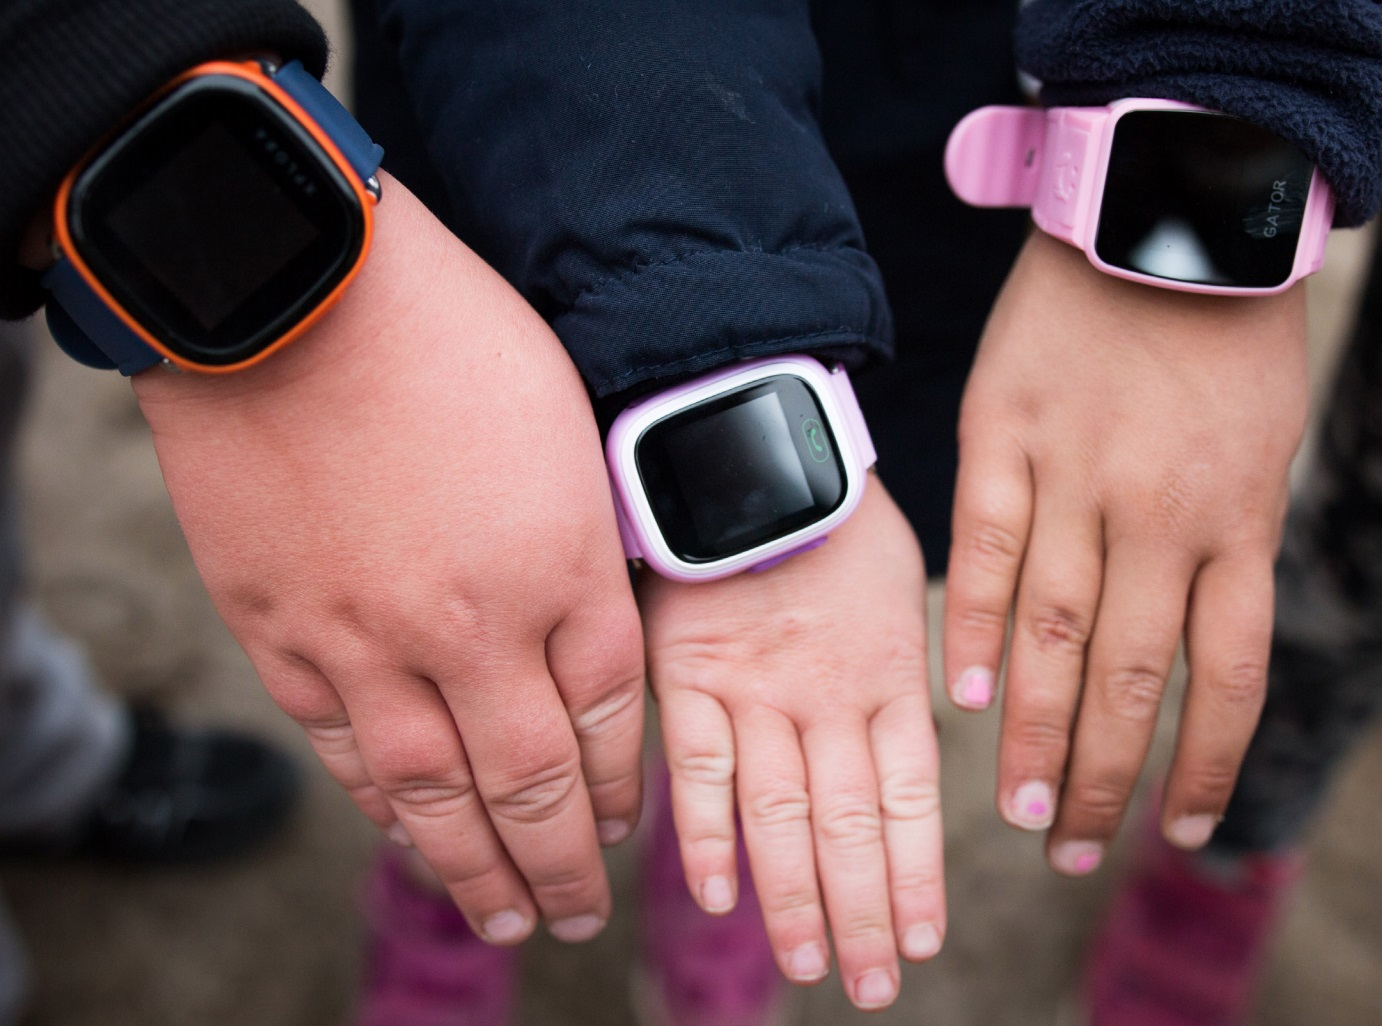 Germany bans smartwatches aimed at kids, tells parents to destroy the devices